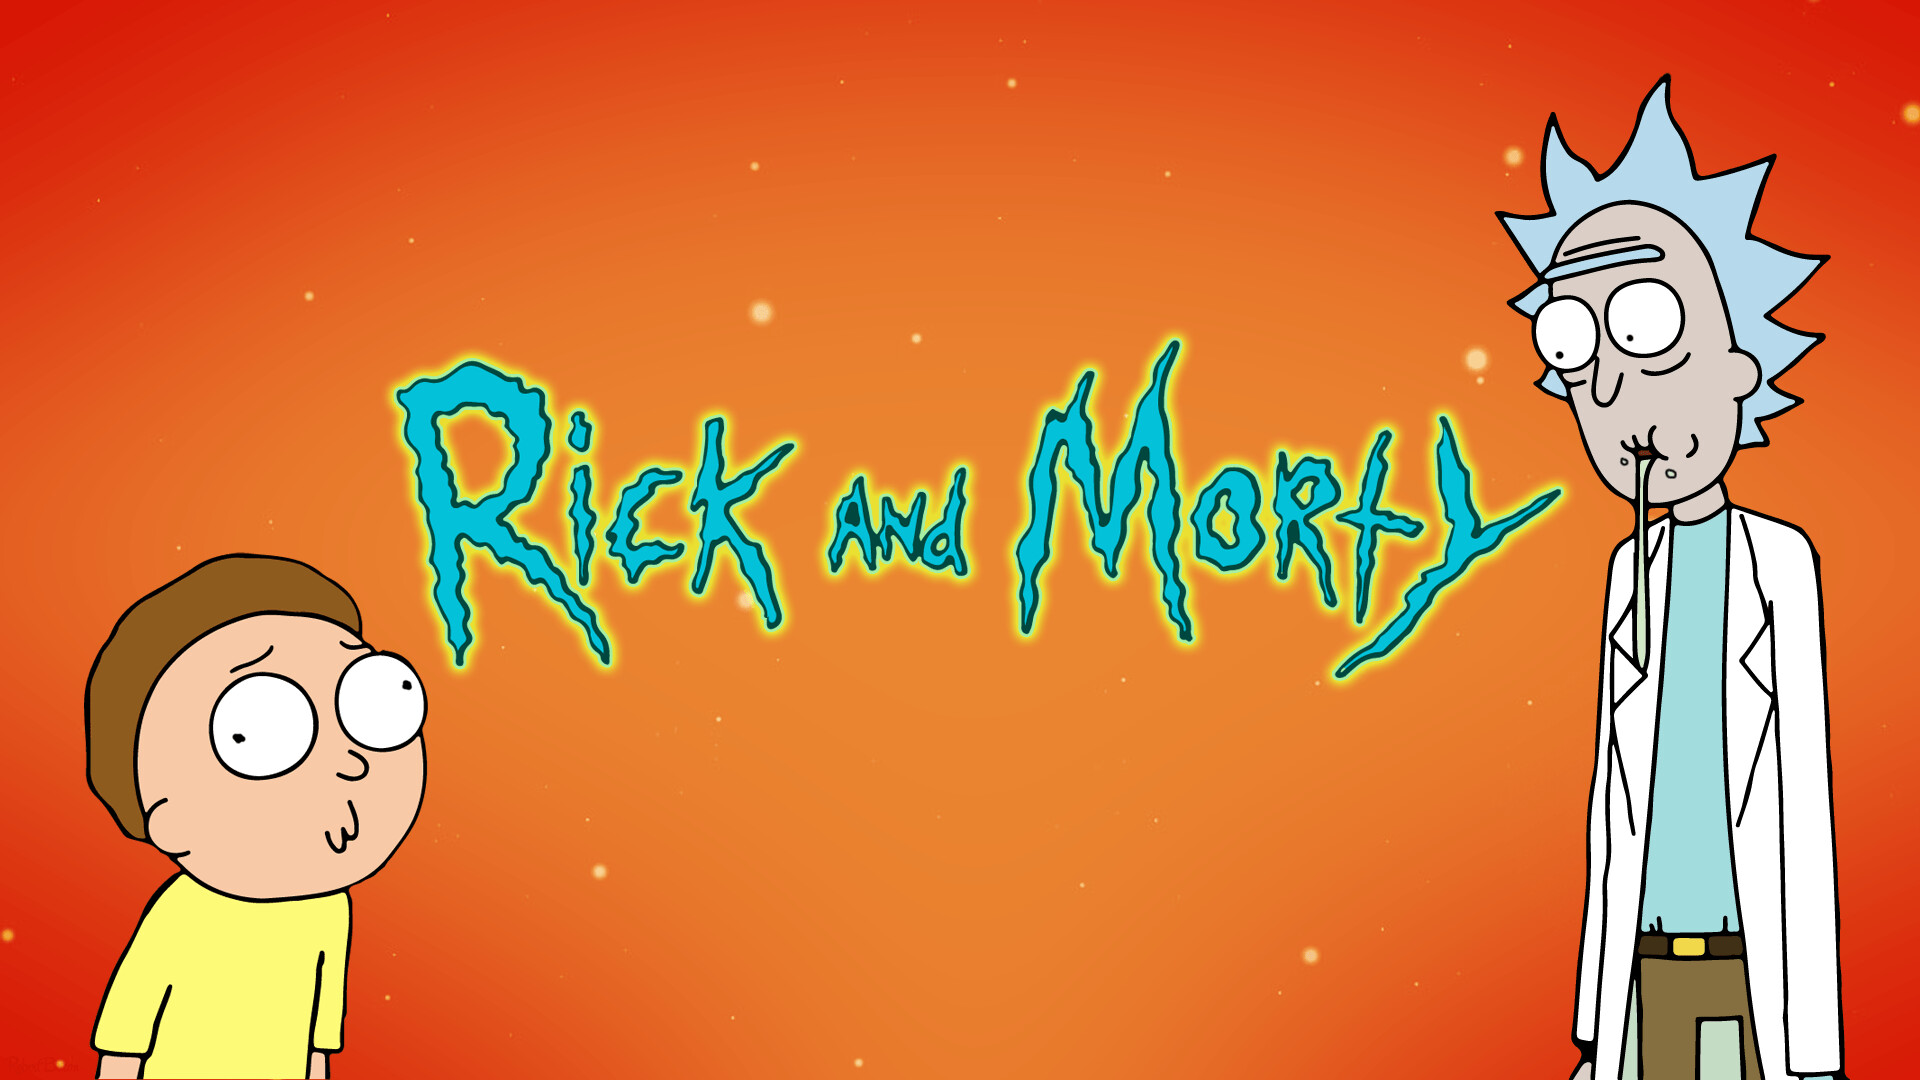 Rick and Morty: The show follows a genius and his grandson as they go on crazy adventures. 1920x1080 Full HD Wallpaper.